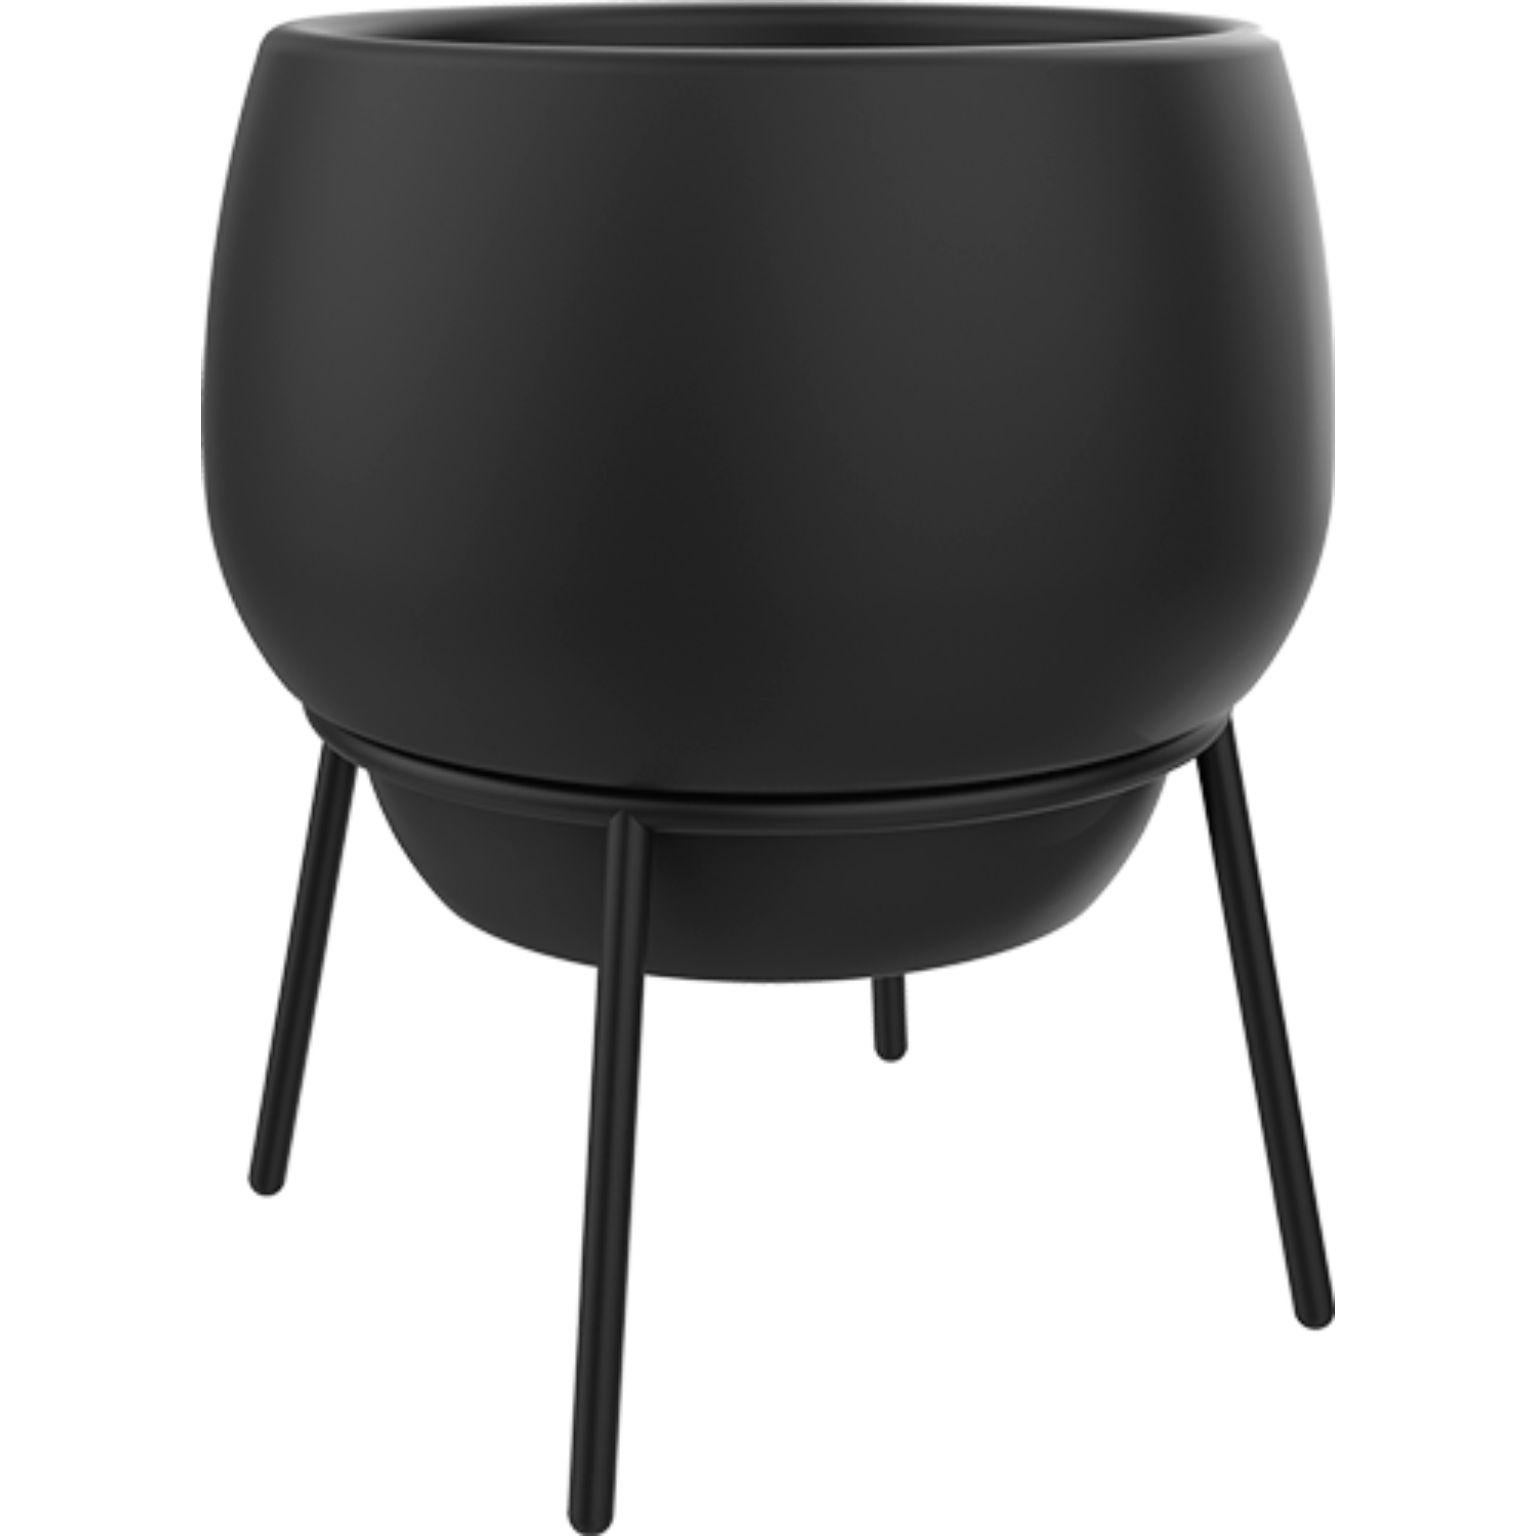 Lace black 65 Pot by Mowee
Dimensions: Ø71 x H76 cm
Material: Polyethylene and stainless steel.
Weight: 9 kg.
Also available in different colors and finishes (Lacquered or retroilluminated).

Lace is a collection of furniture made by